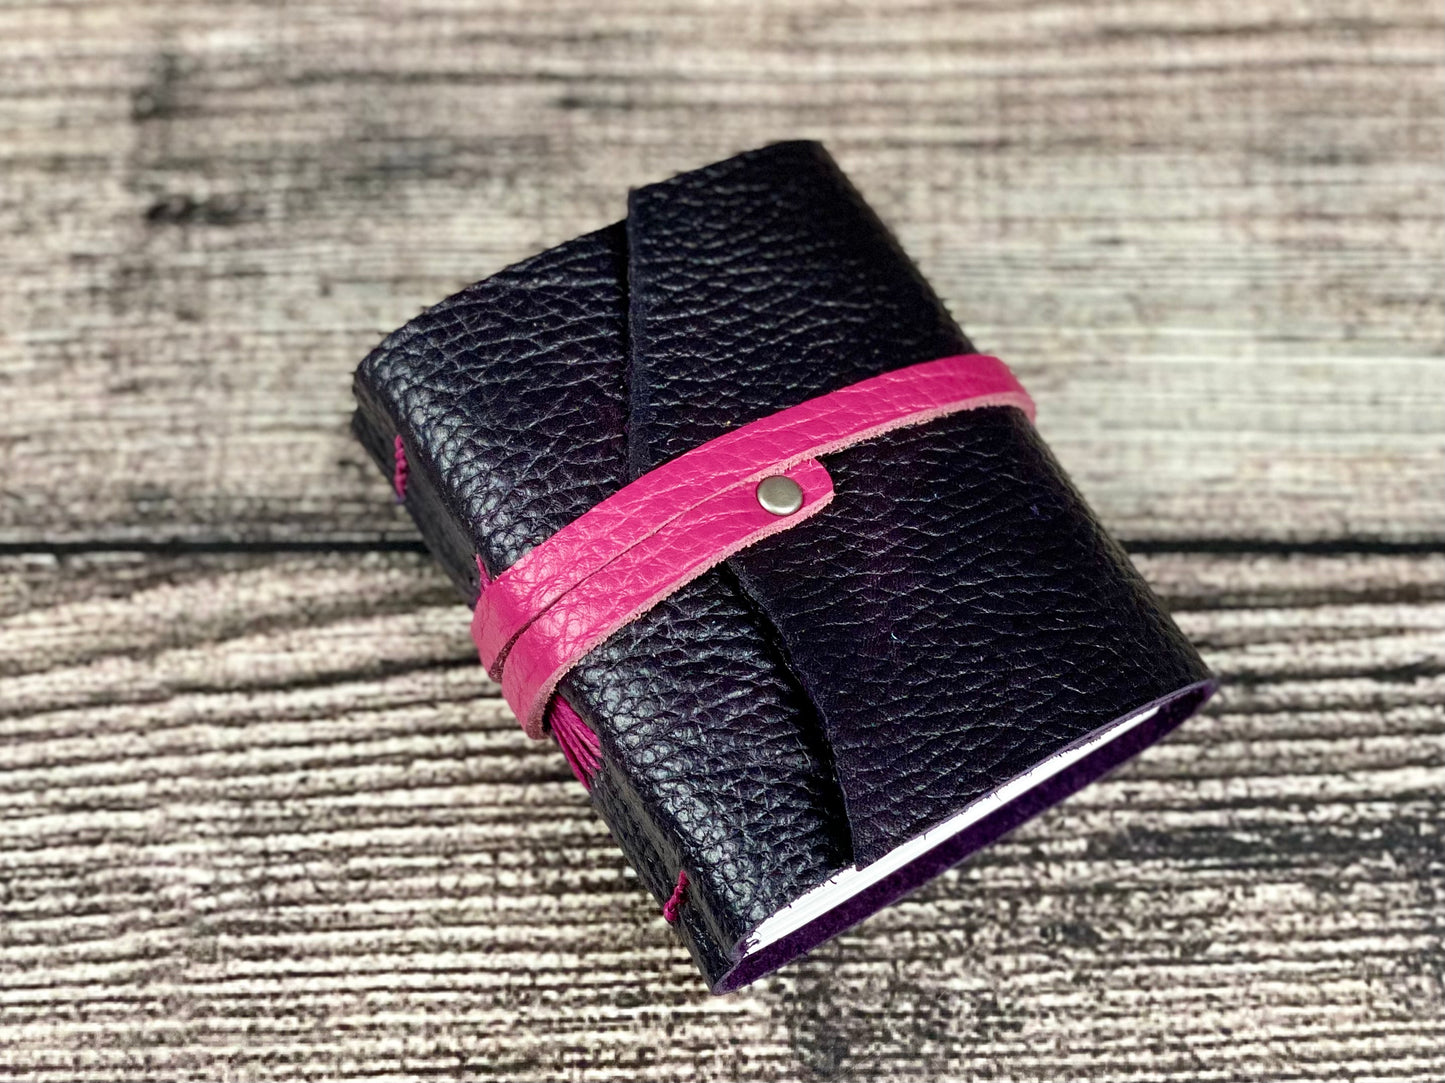 Mini Journals - Available in various leathers